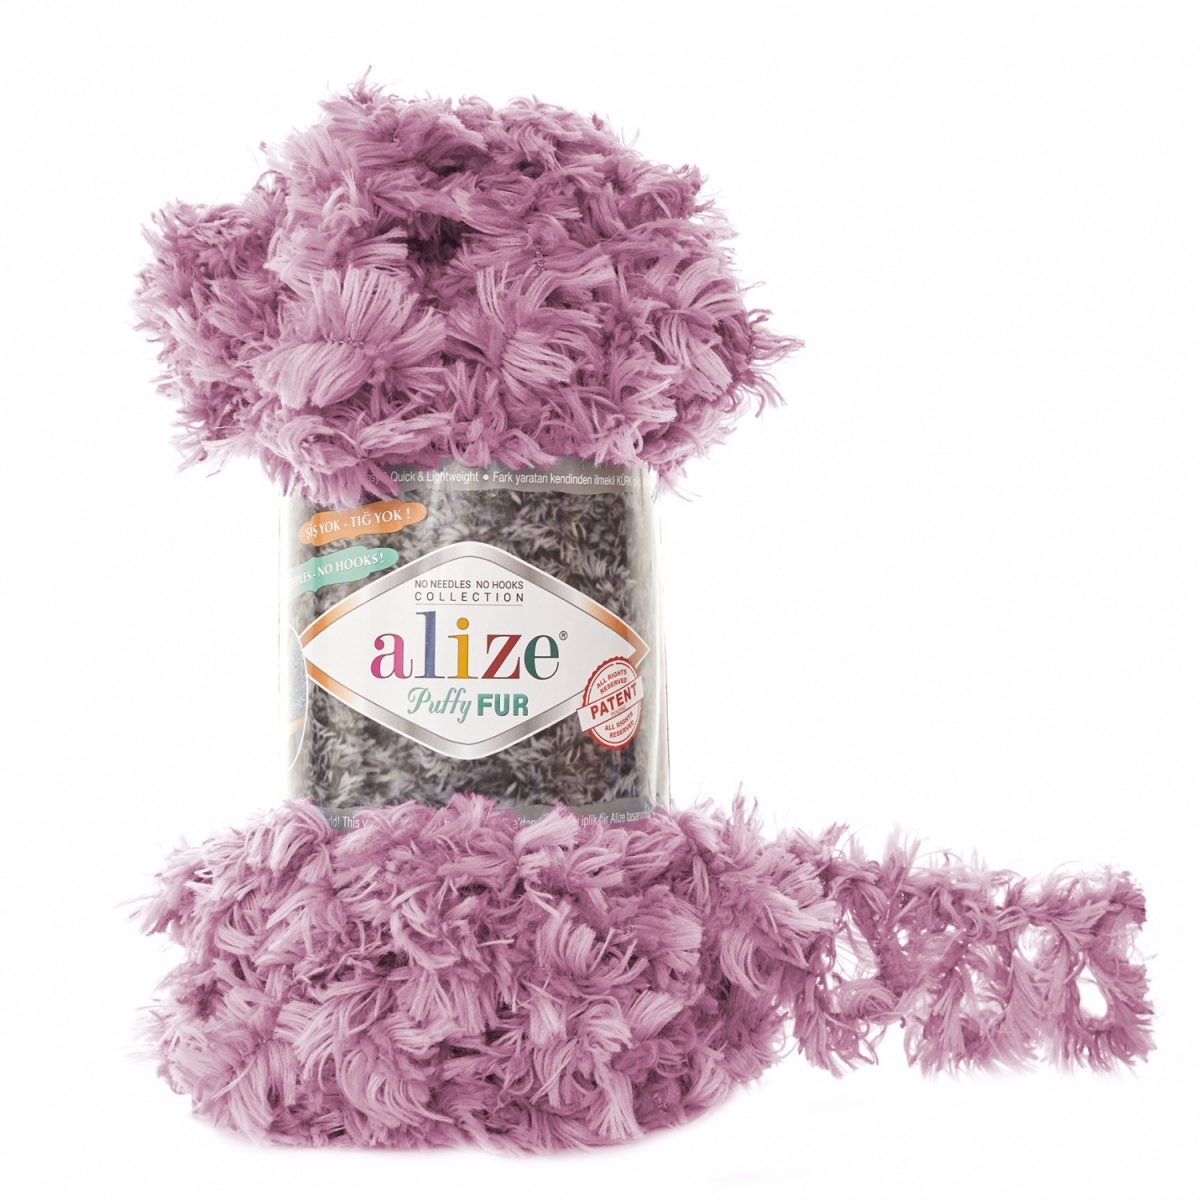 Alize Puffy Fur, 100% Polyester 5 Skein Value Pack, 500g фото 4